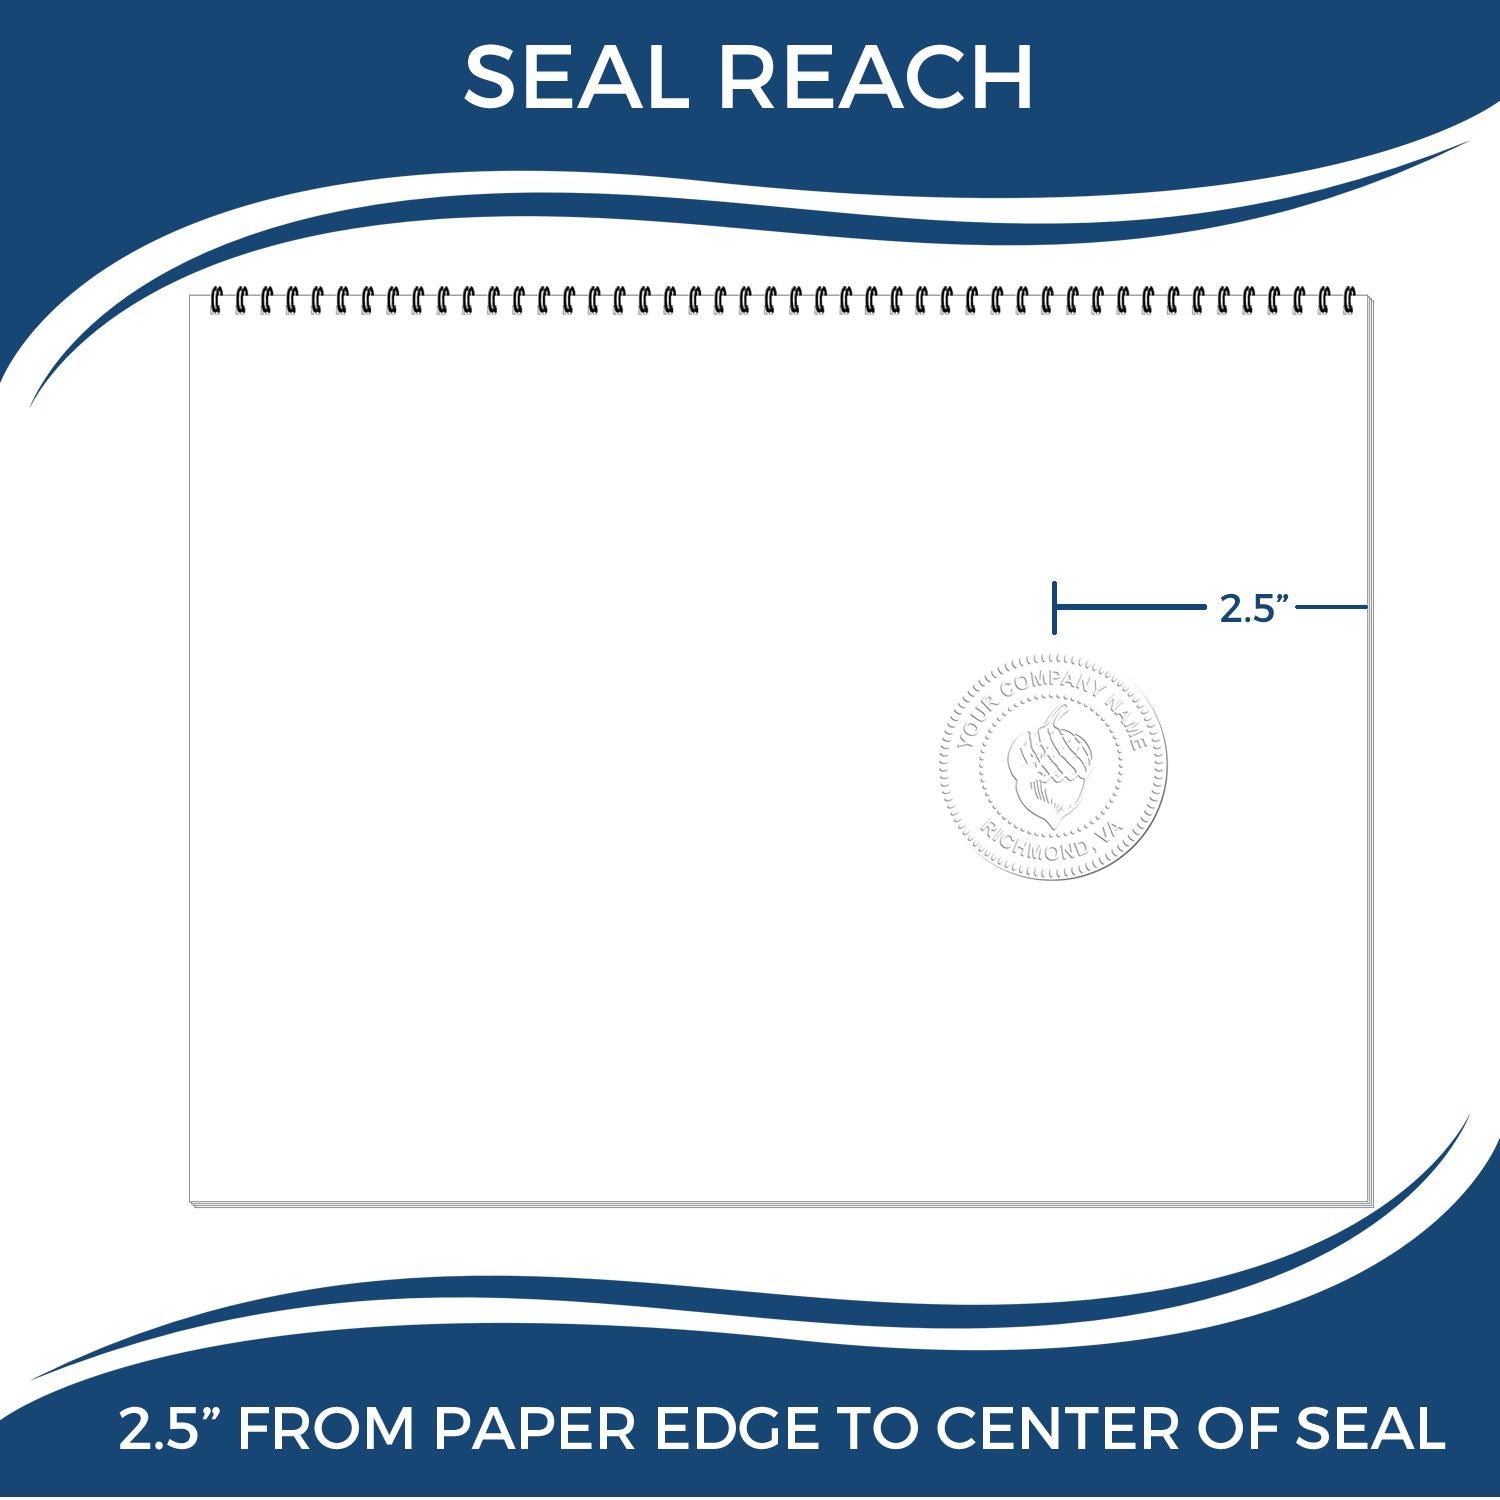 An infographic showing the seal reach which is represented by a ruler and a miniature seal image of the State of New Mexico Long Reach Architectural Embossing Seal